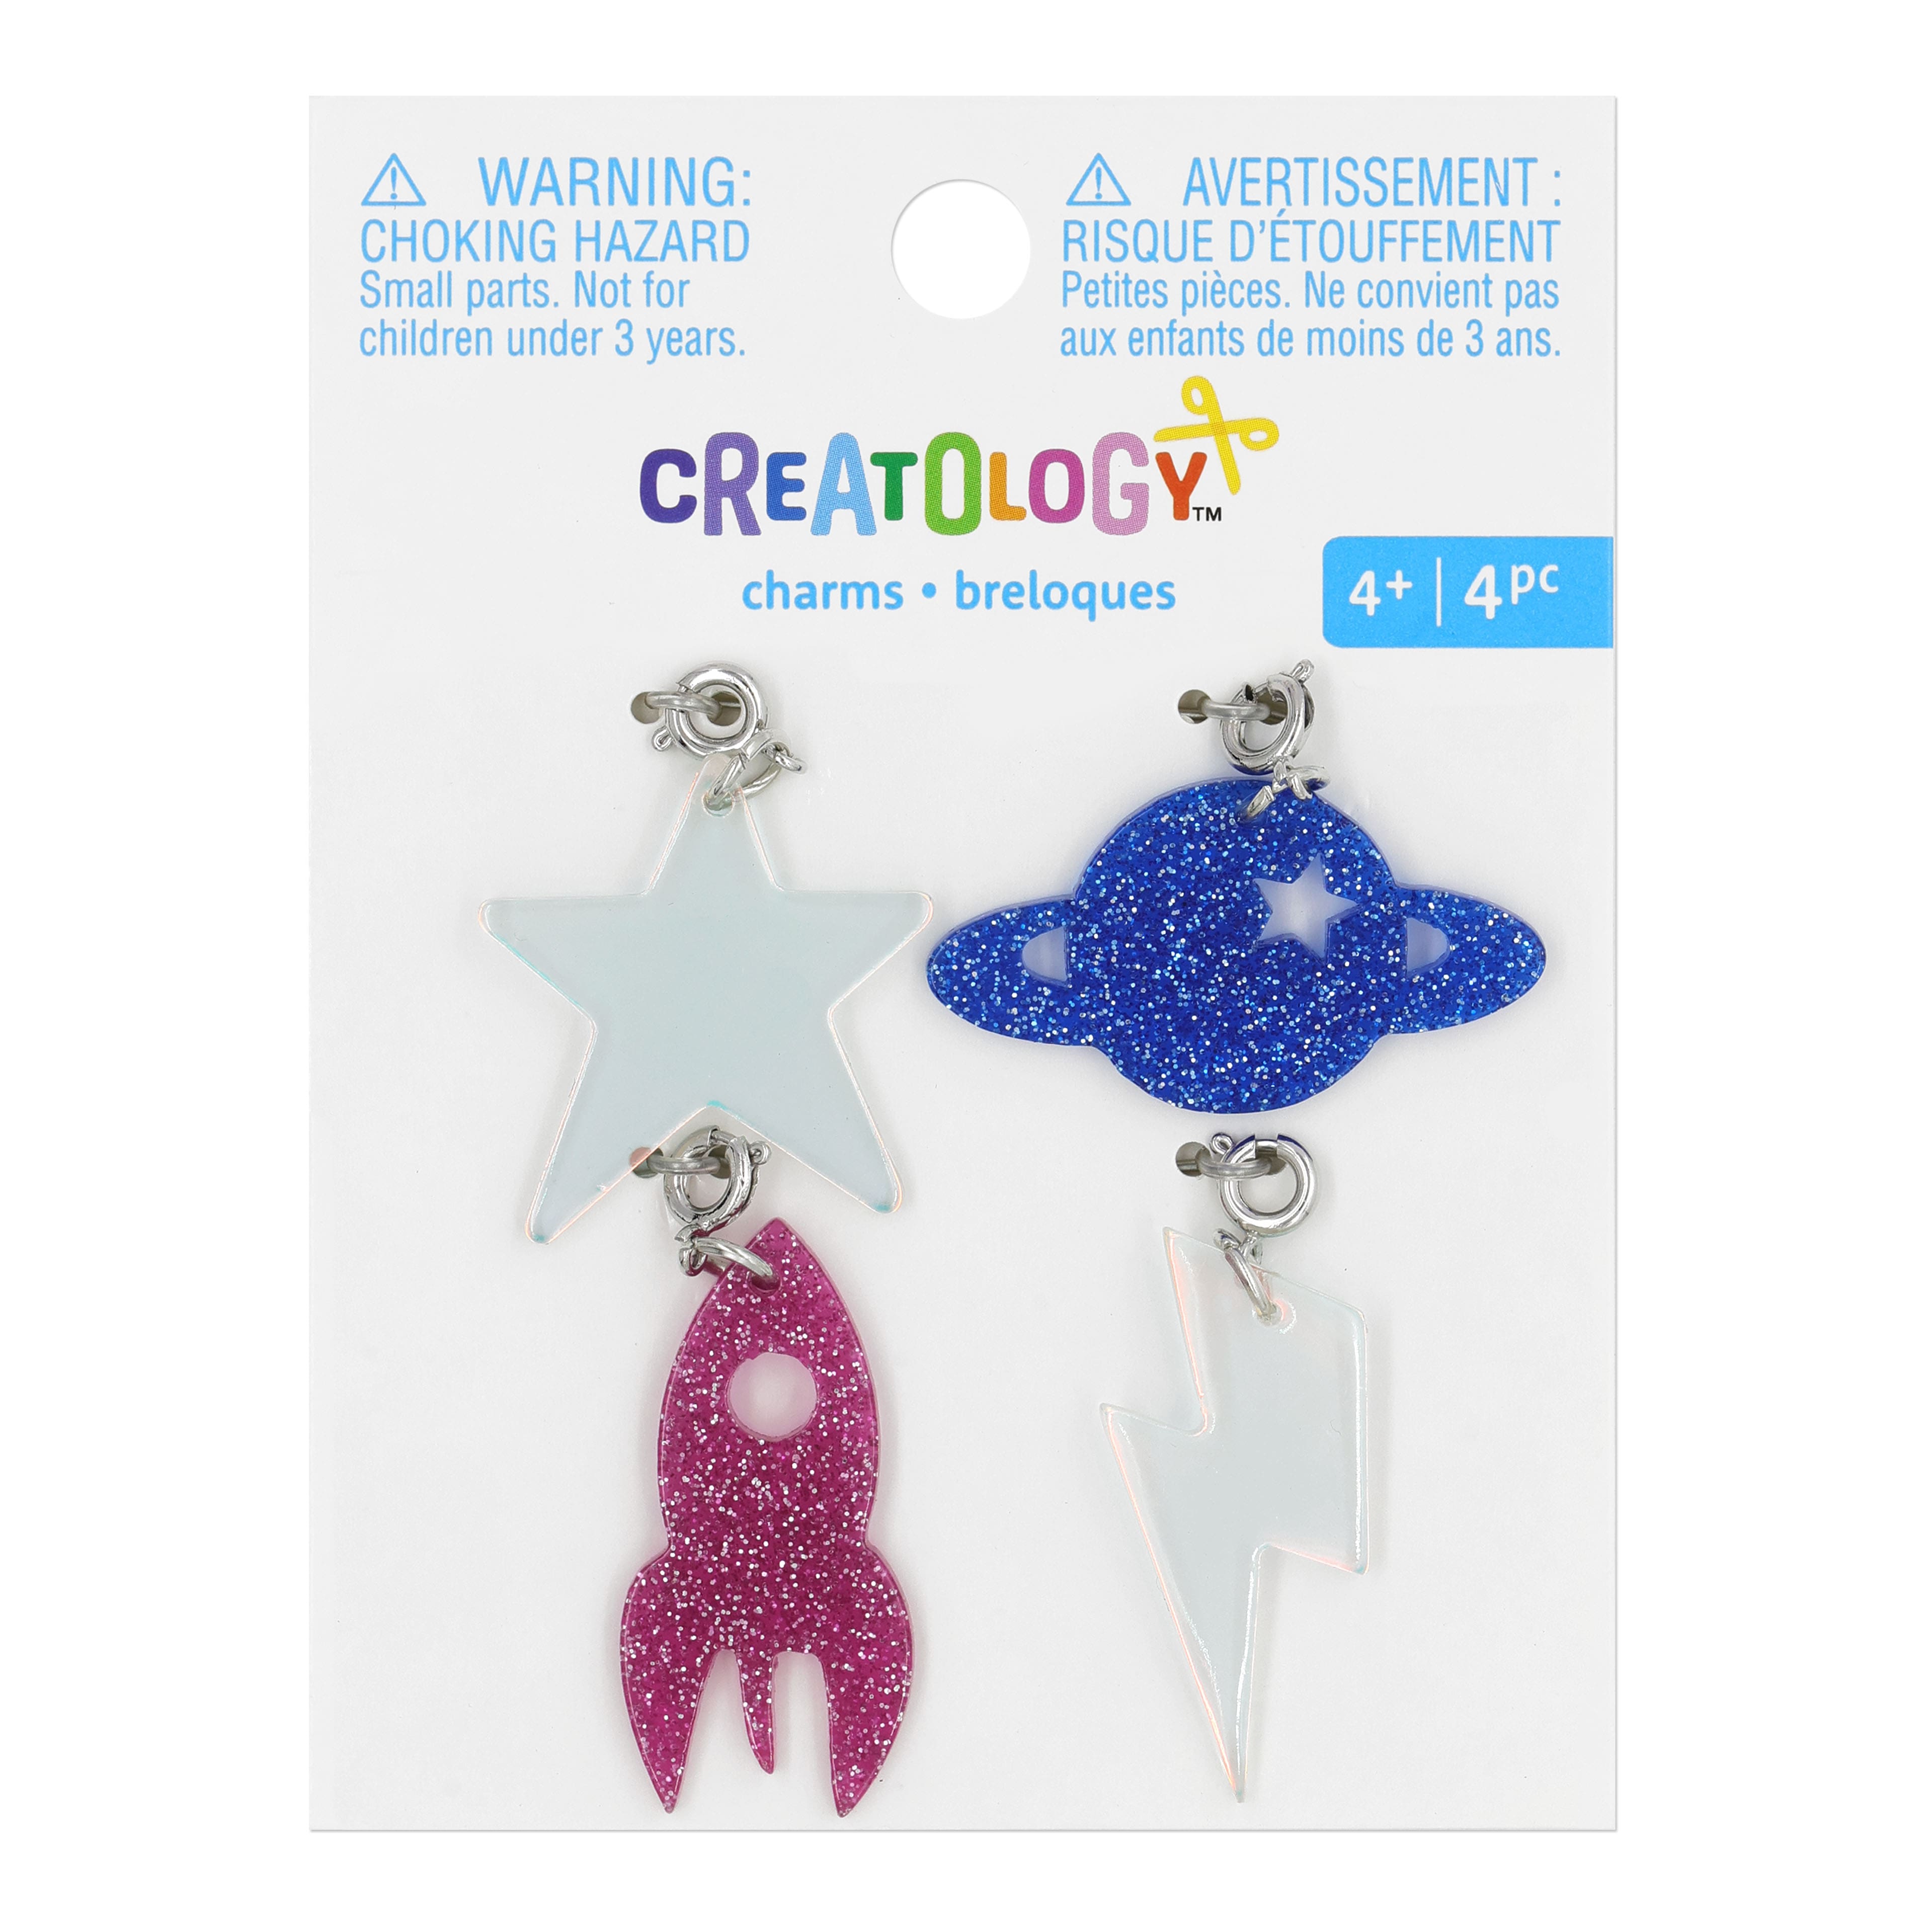 Flower Charms by Creatology™